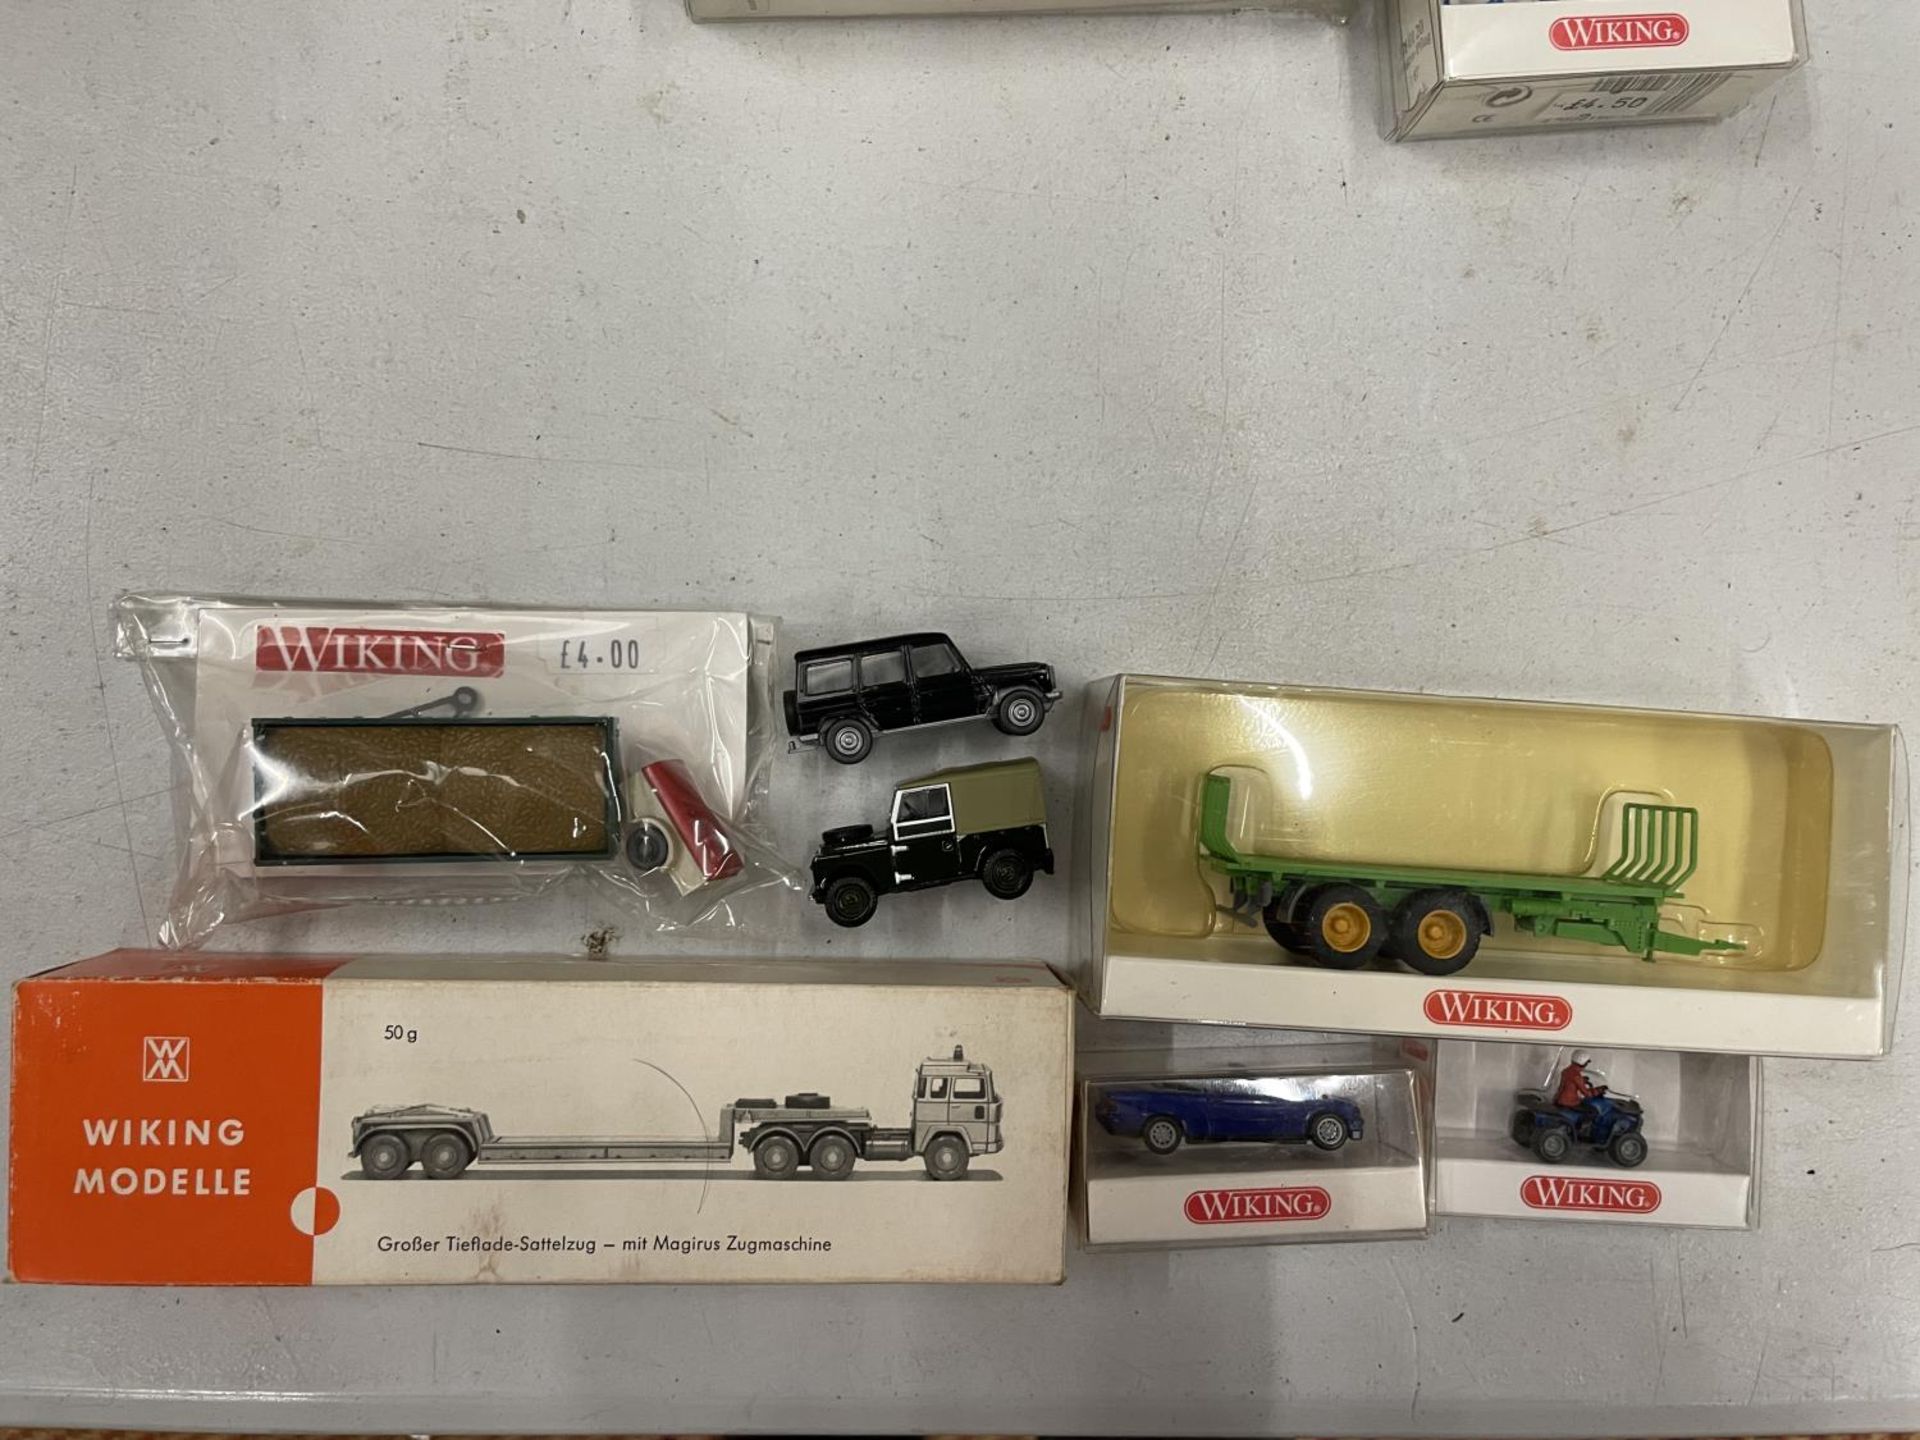 EIGHTEEN 1:87 SCALE MIXED VEHICLES, TWO UNBOXED - Image 5 of 6